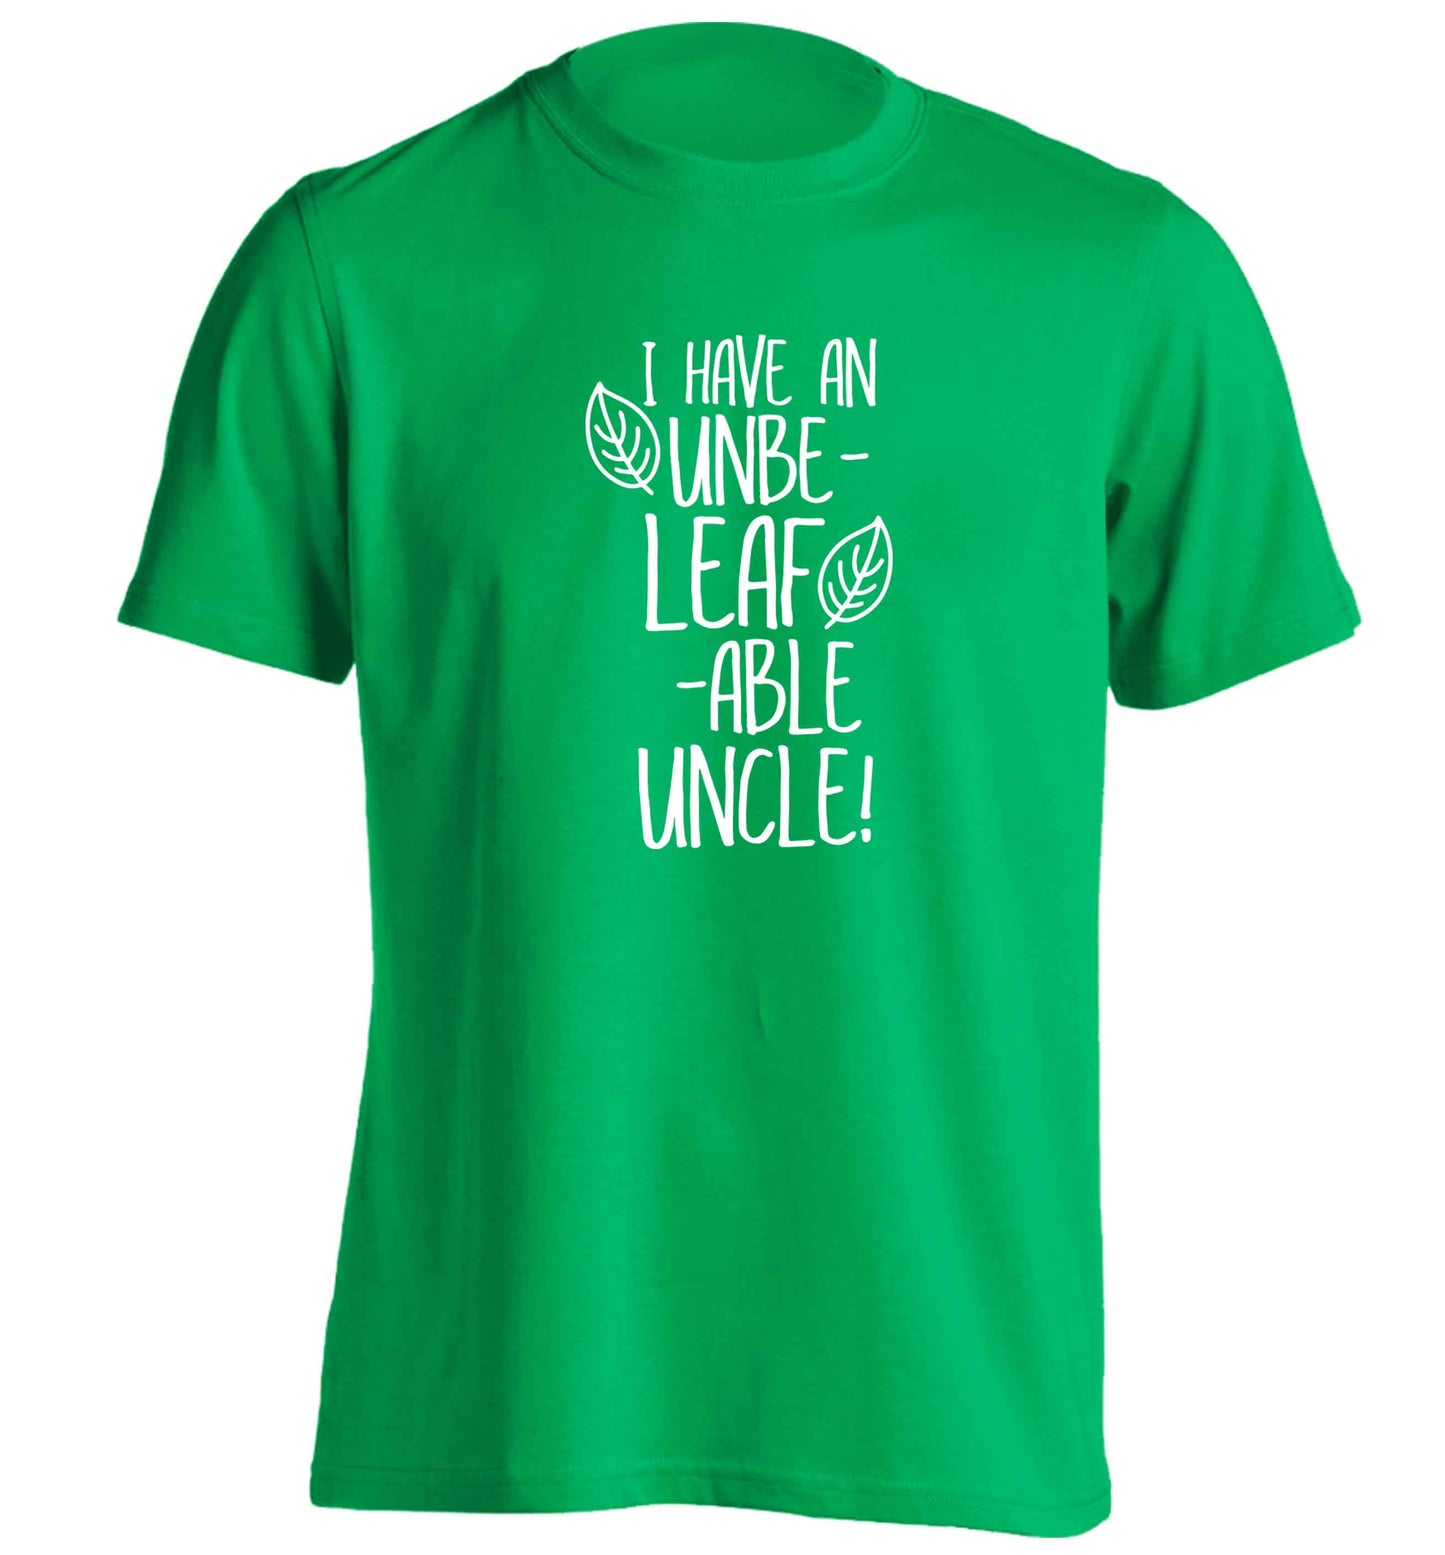 I have an unbe-leaf-able uncle adults unisex green Tshirt 2XL